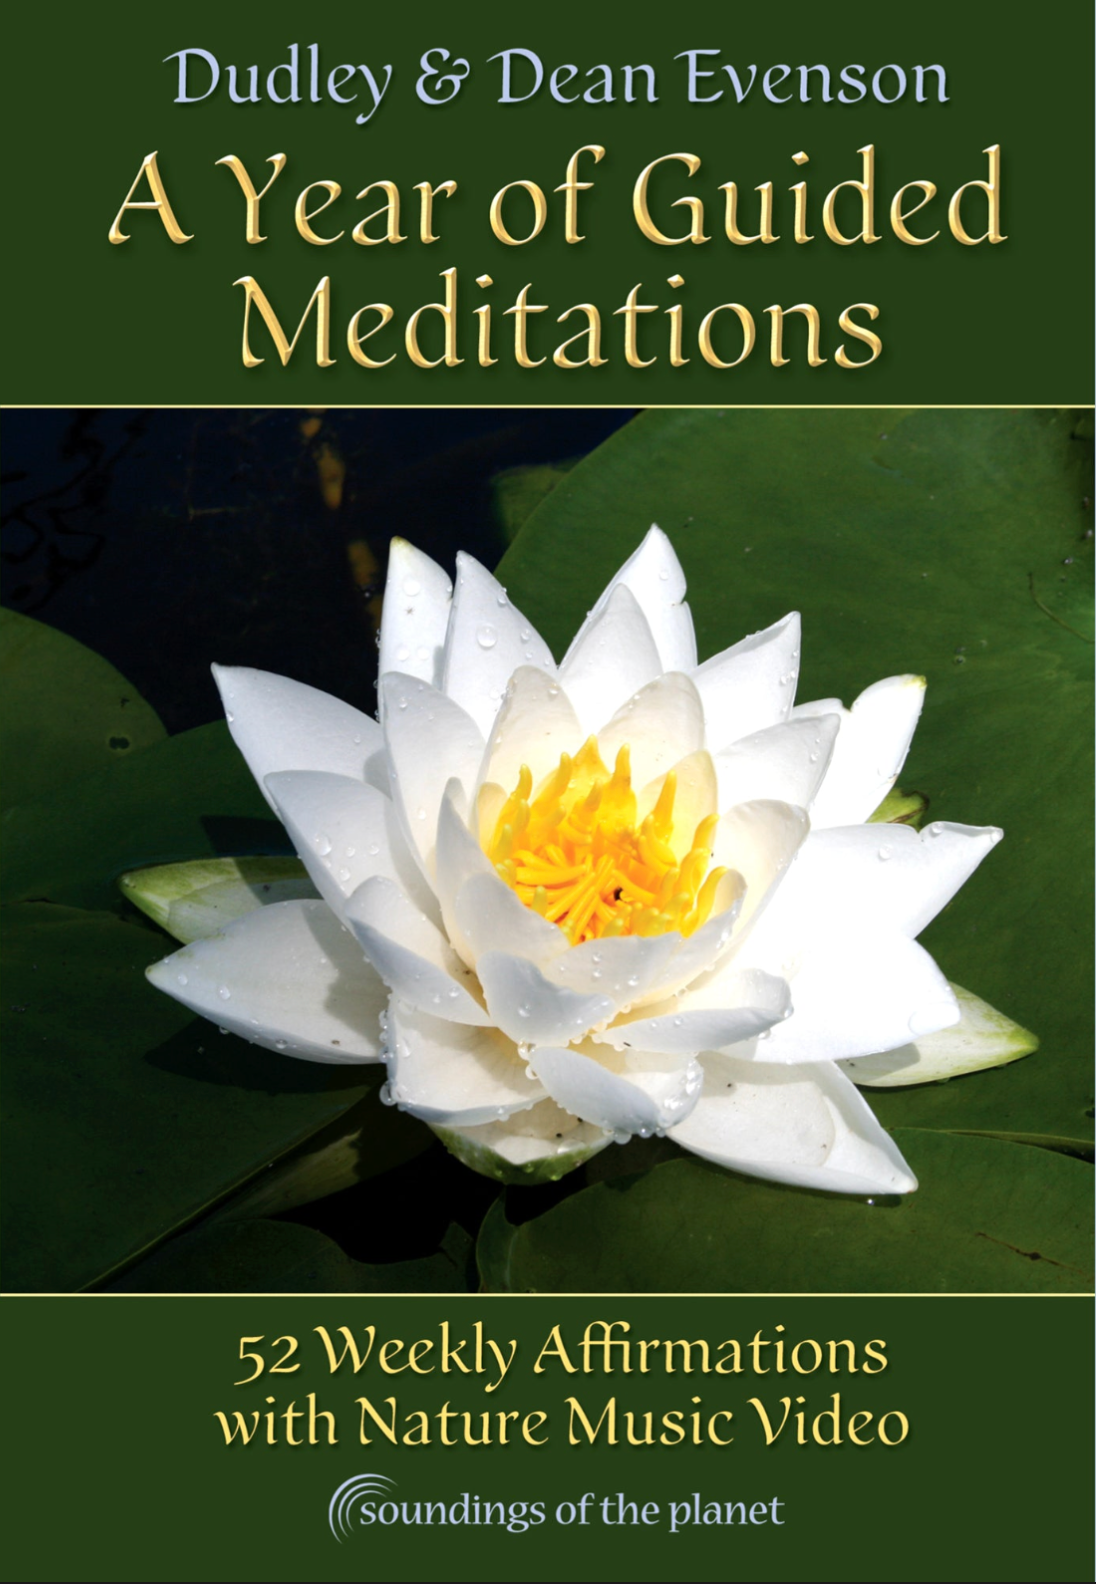 A Year of Guided Meditations DVD